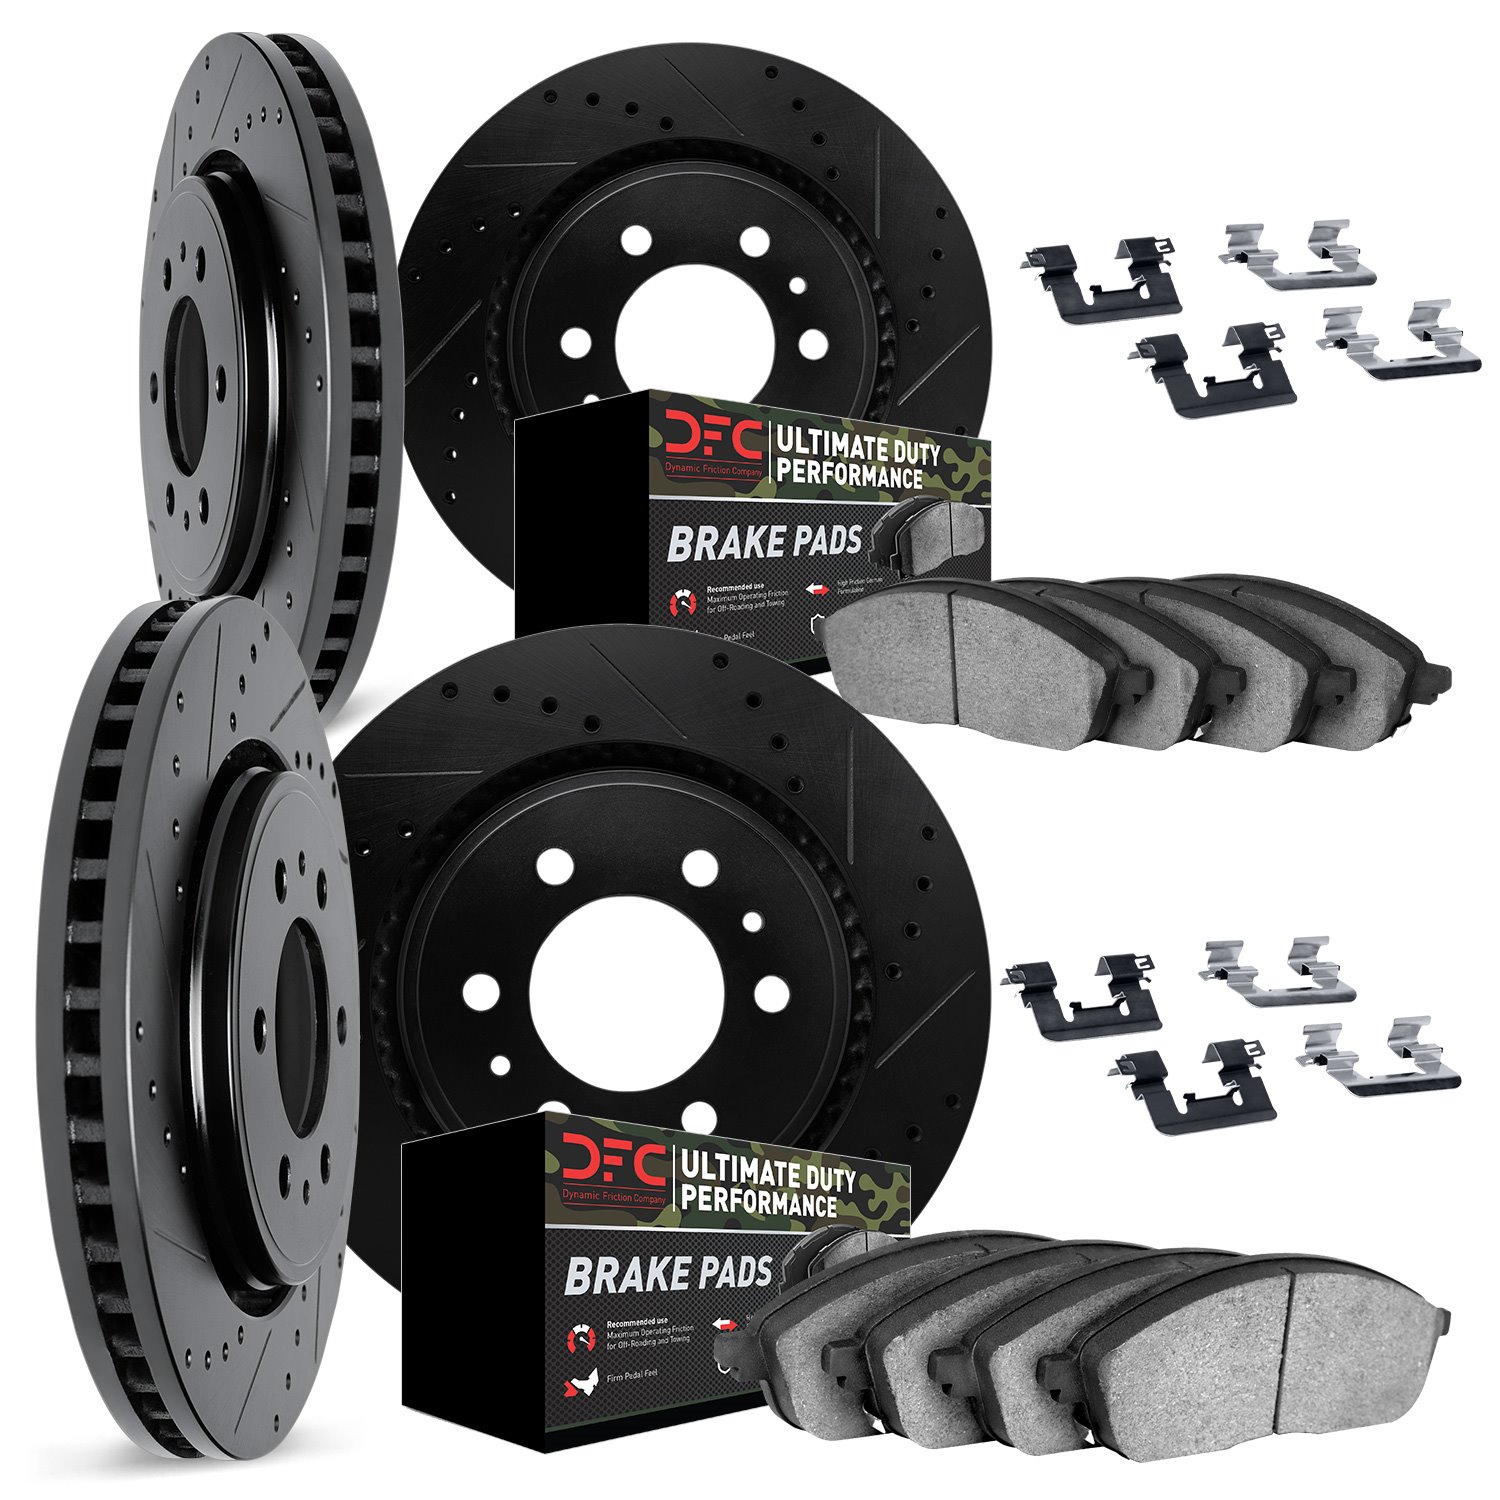 8414-67005 Drilled/Slotted Brake Rotors with Ultimate-Duty Brake Pads Kit & Hardware [Black], Fits Select Infiniti/Nissan, Posit